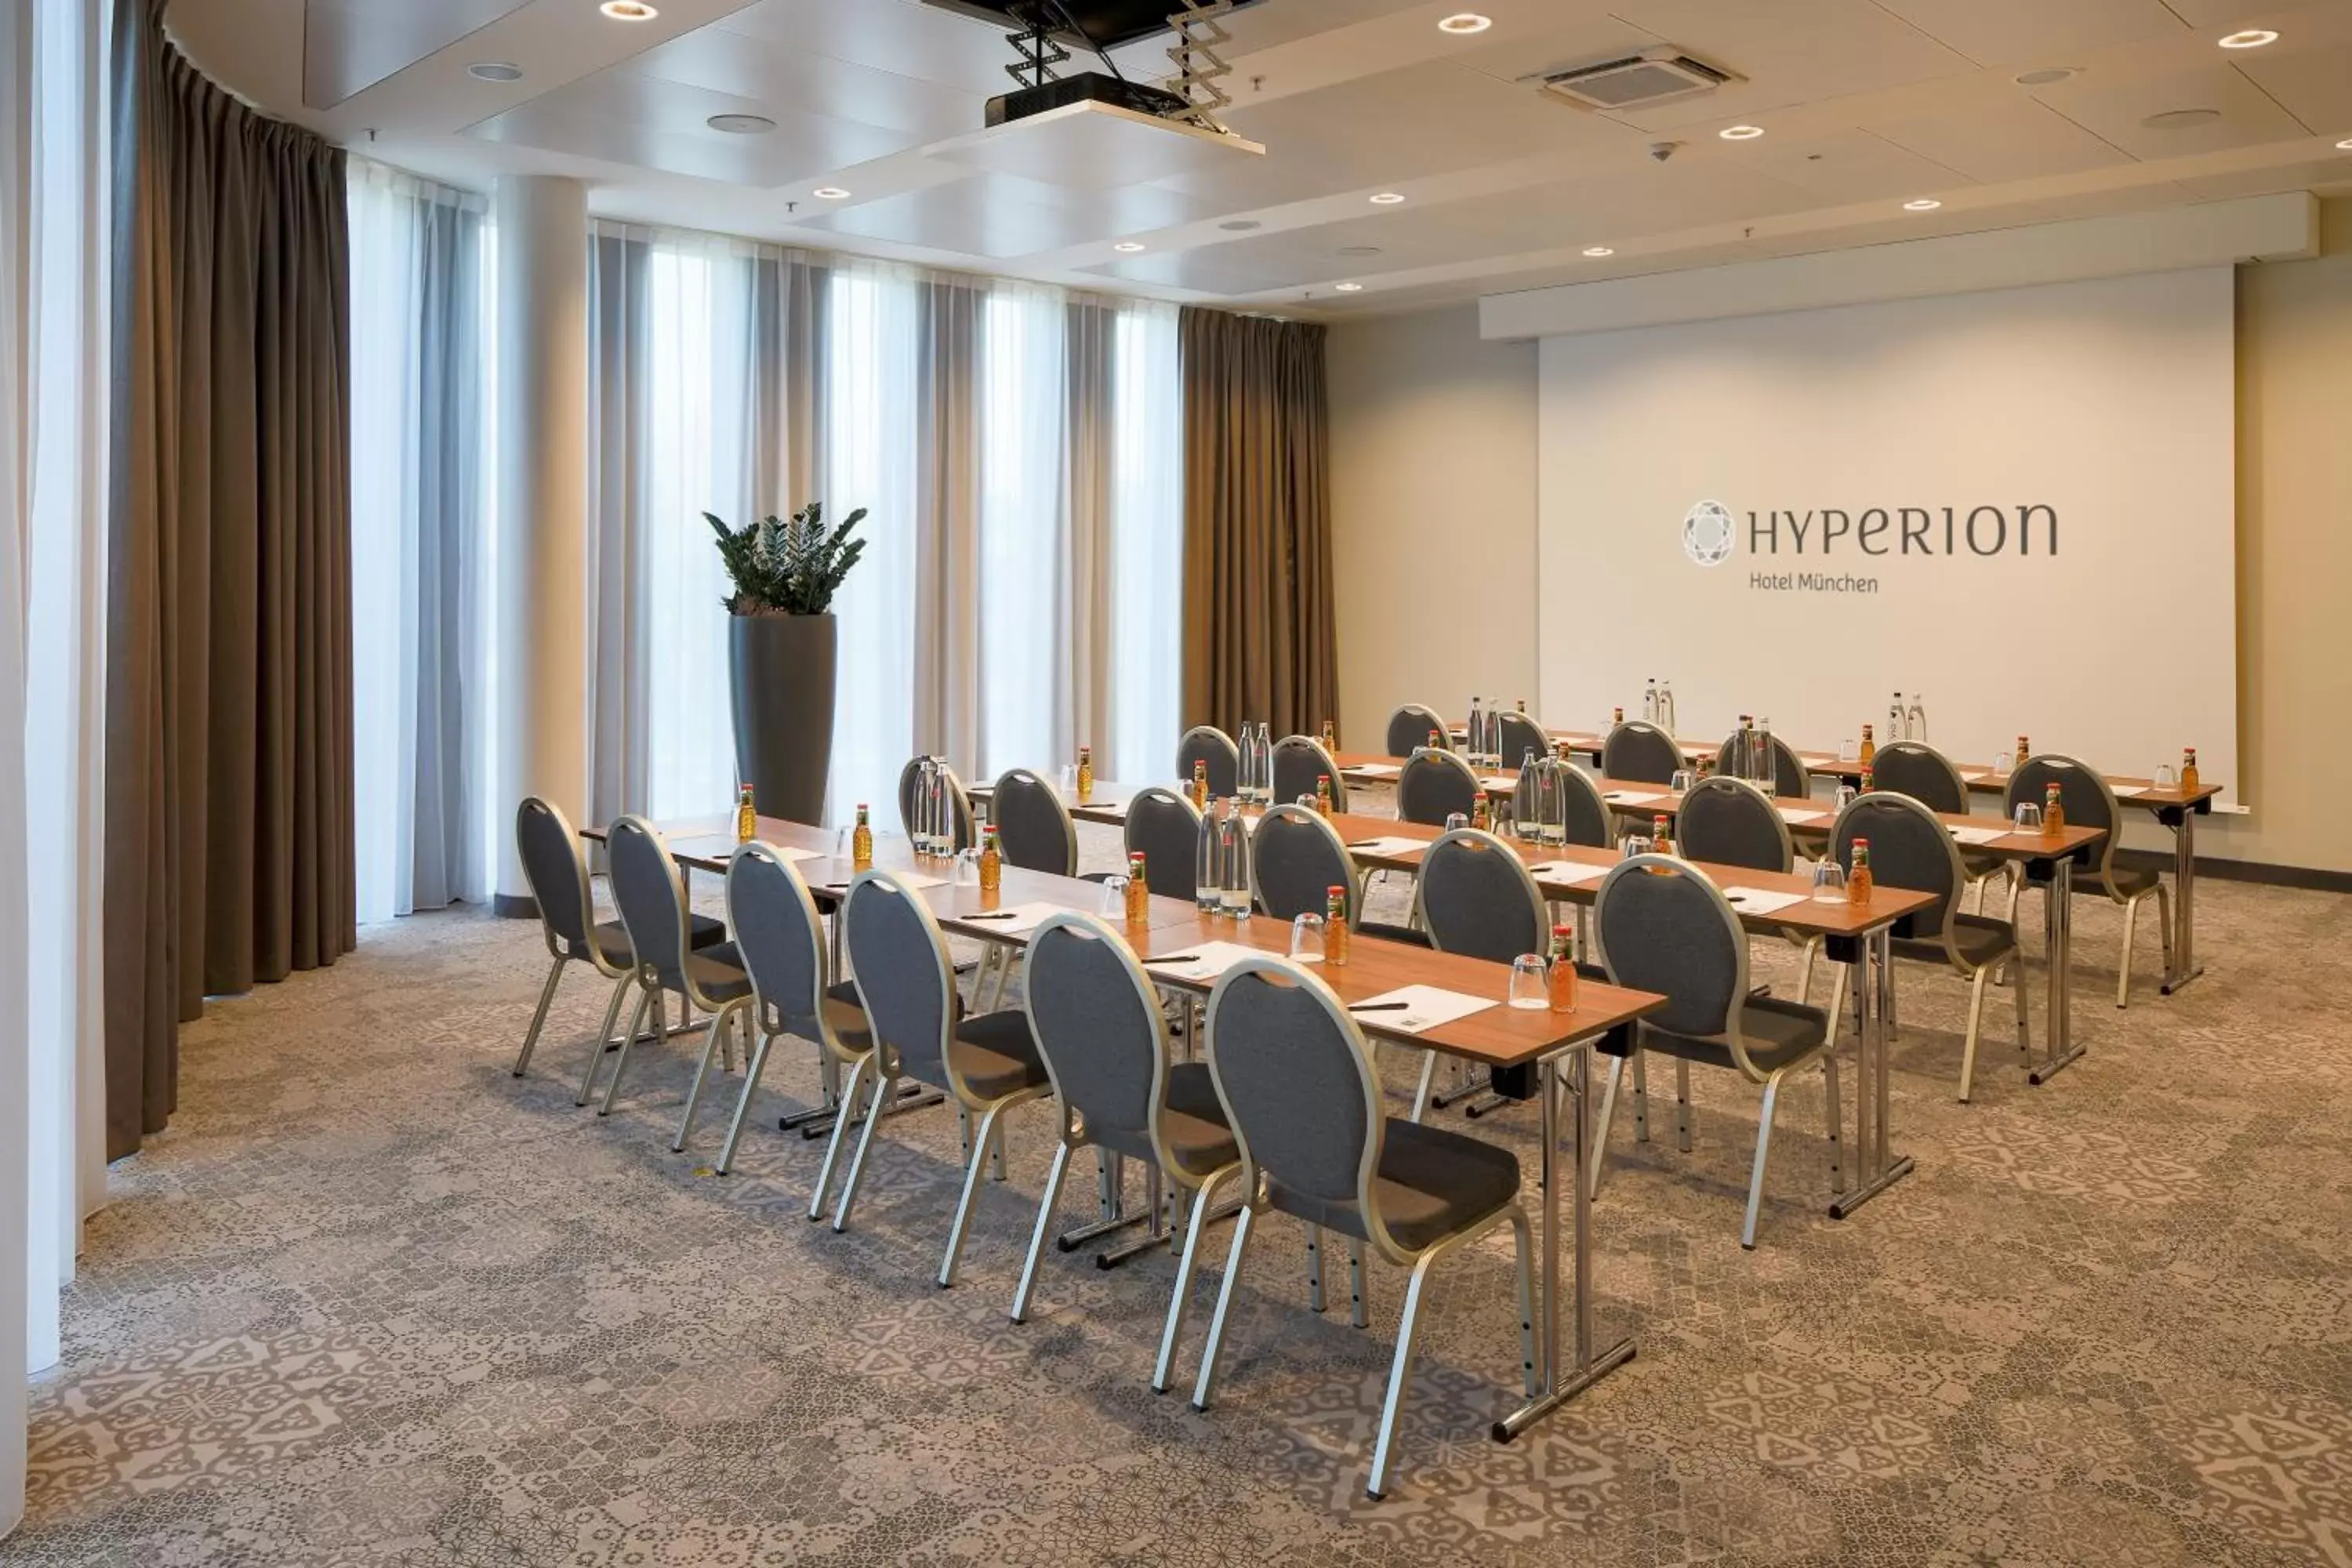 Meeting/conference room in Hyperion Hotel München